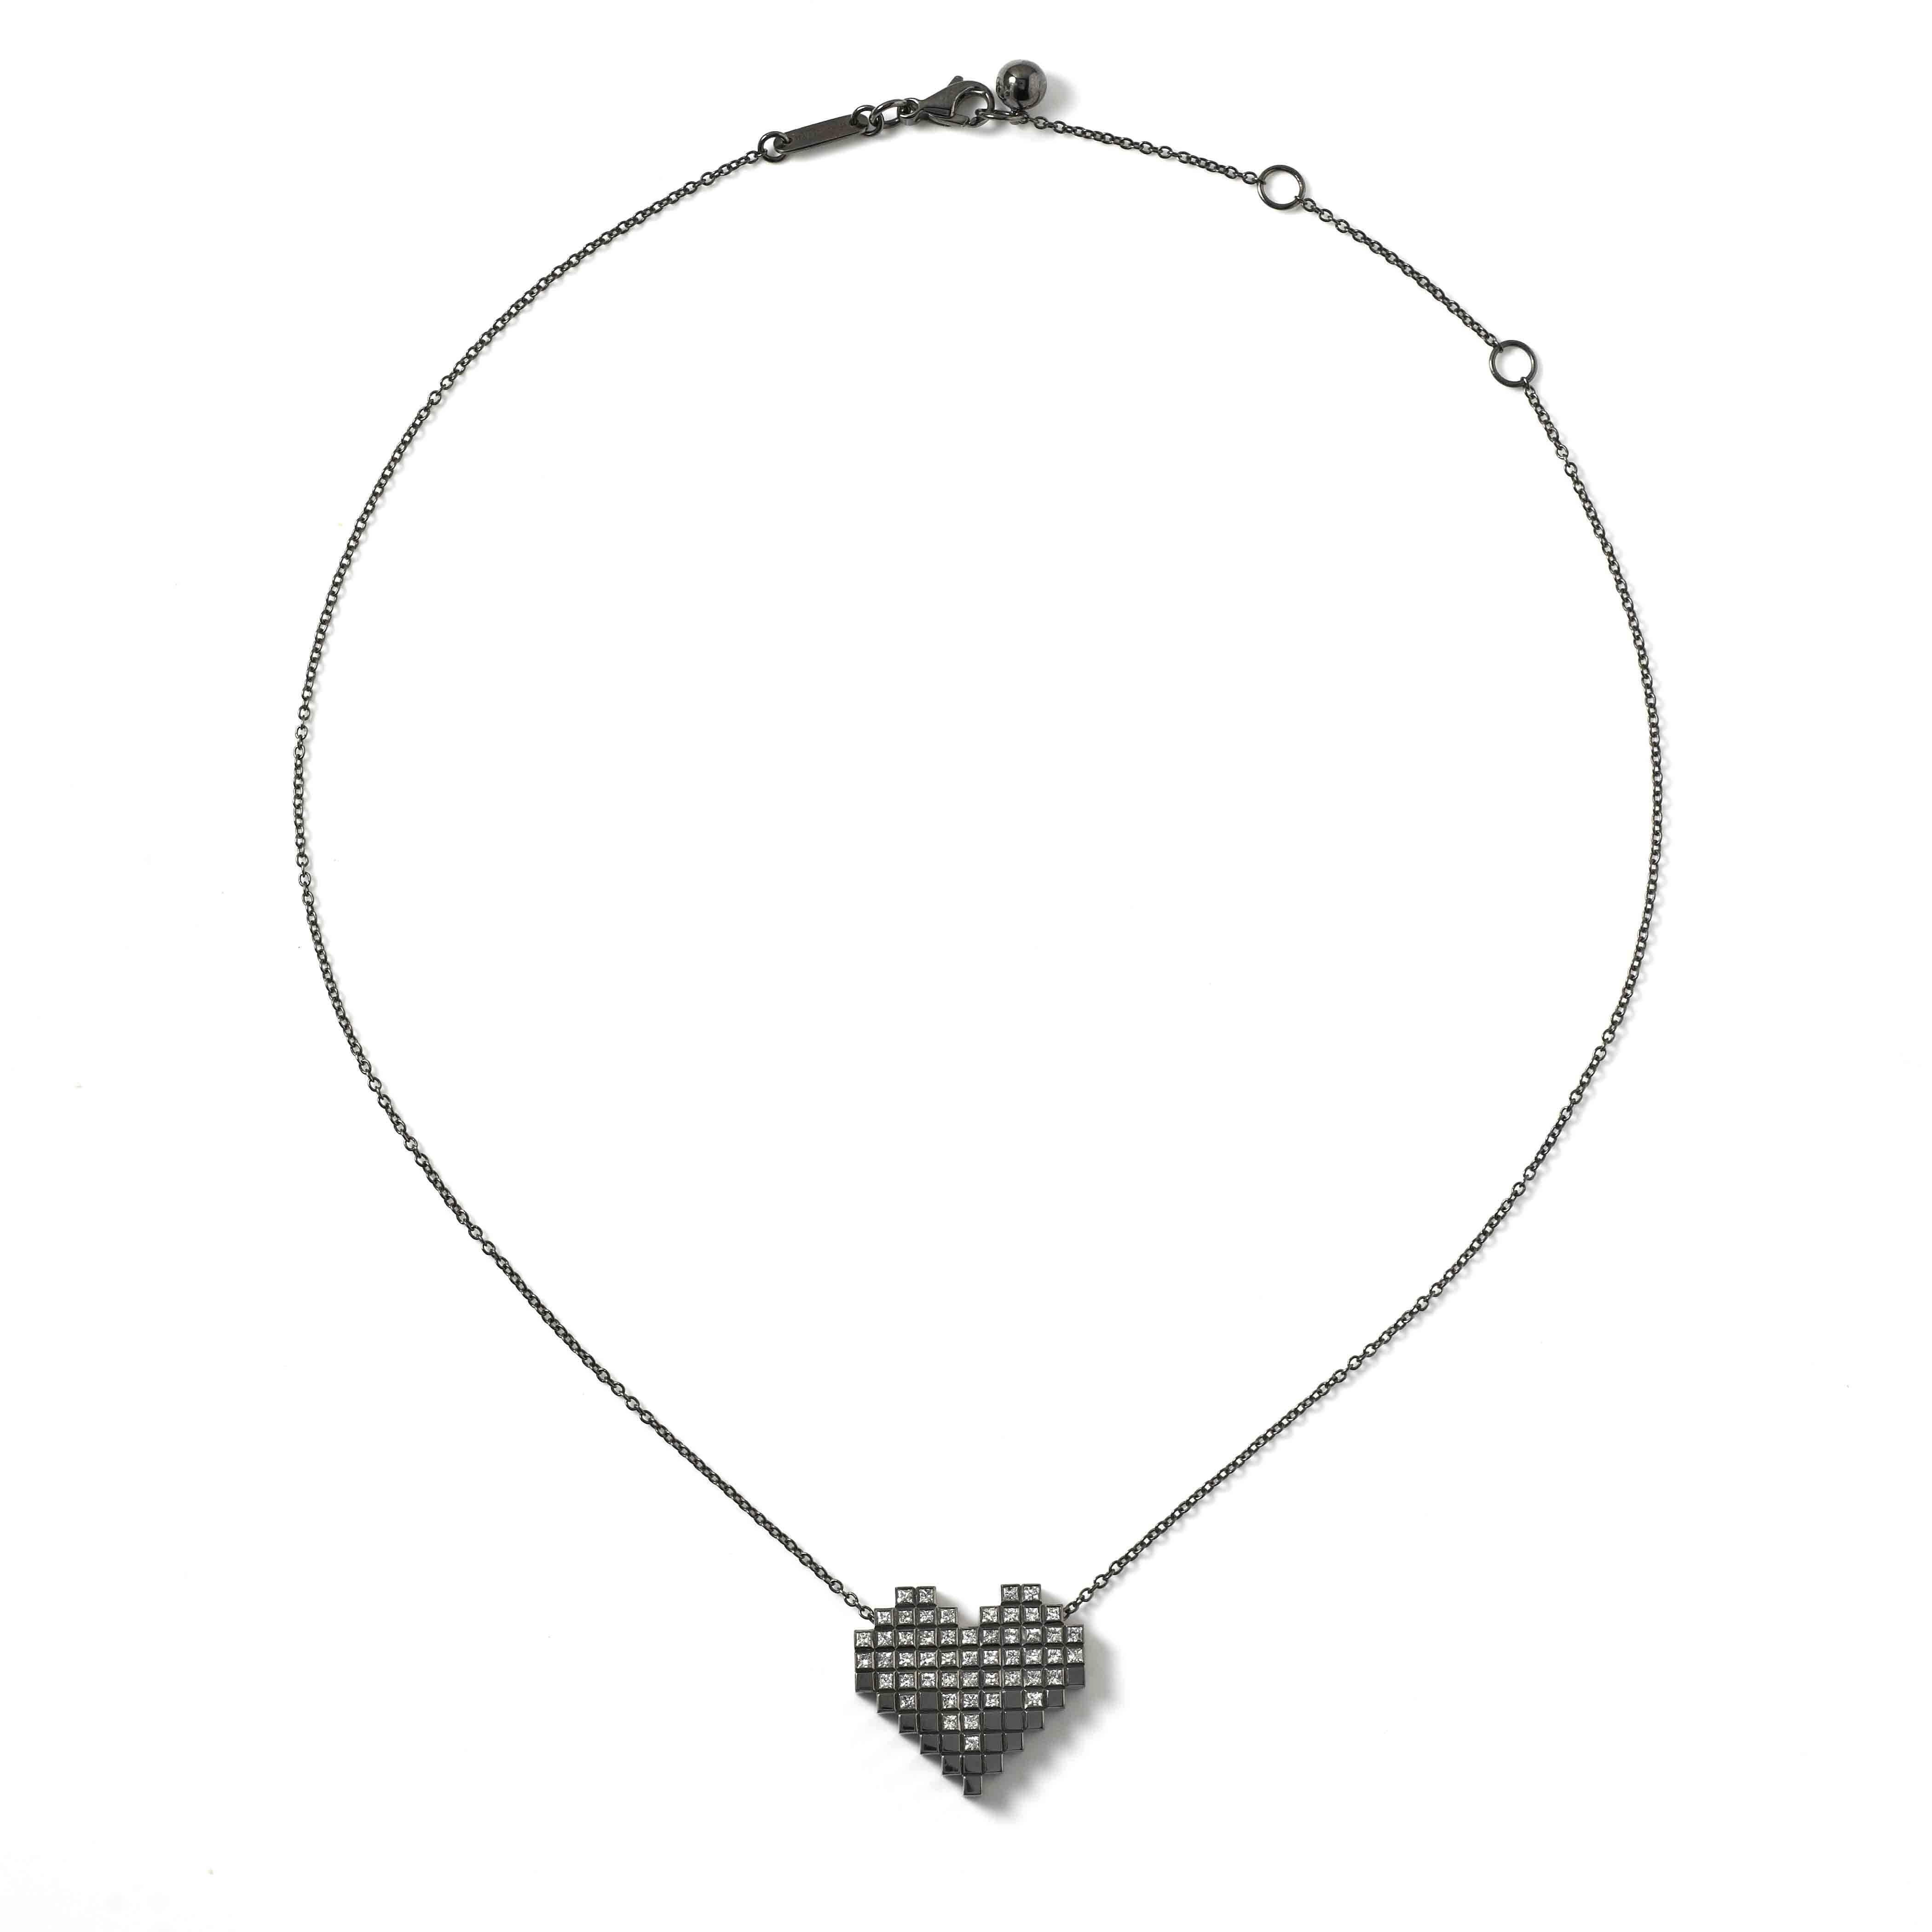 Black Gold and Diamond Pixel Heart Necklace by Francesca Grima 

18ct. Black Gold set with Diamonds on Black Gold Chain.
・51 Princess-cut Diamonds (0.63cts)
・Polished 18ct. Black Gold
・Pendant length: 2cm
・Pendant width; 2.1cm
・Chain can be worn in